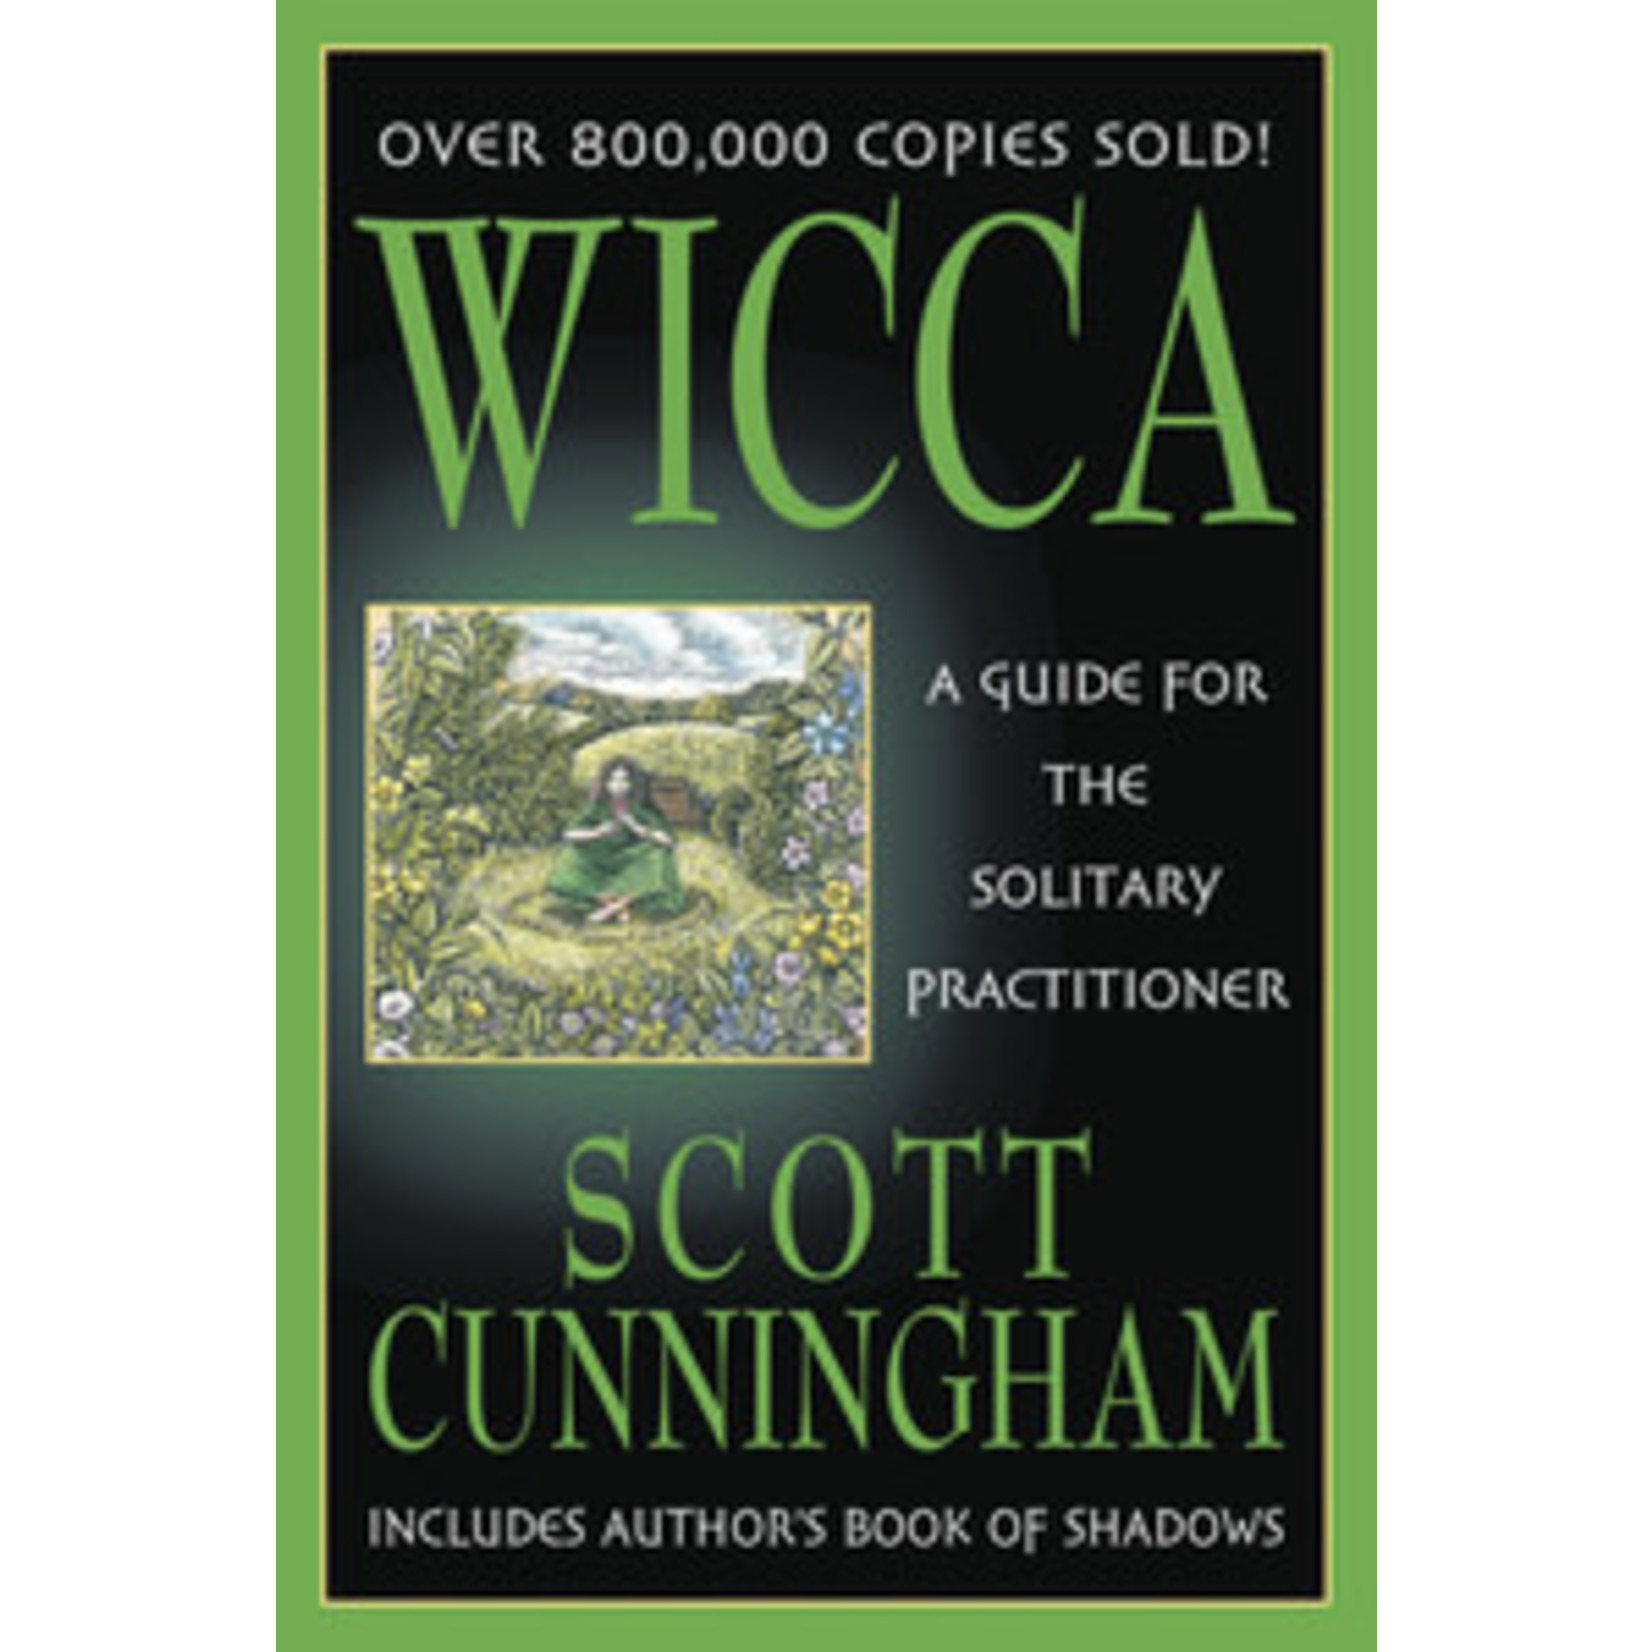 Wicca: Guide For The Solitary Practioner by Scott Cunningham